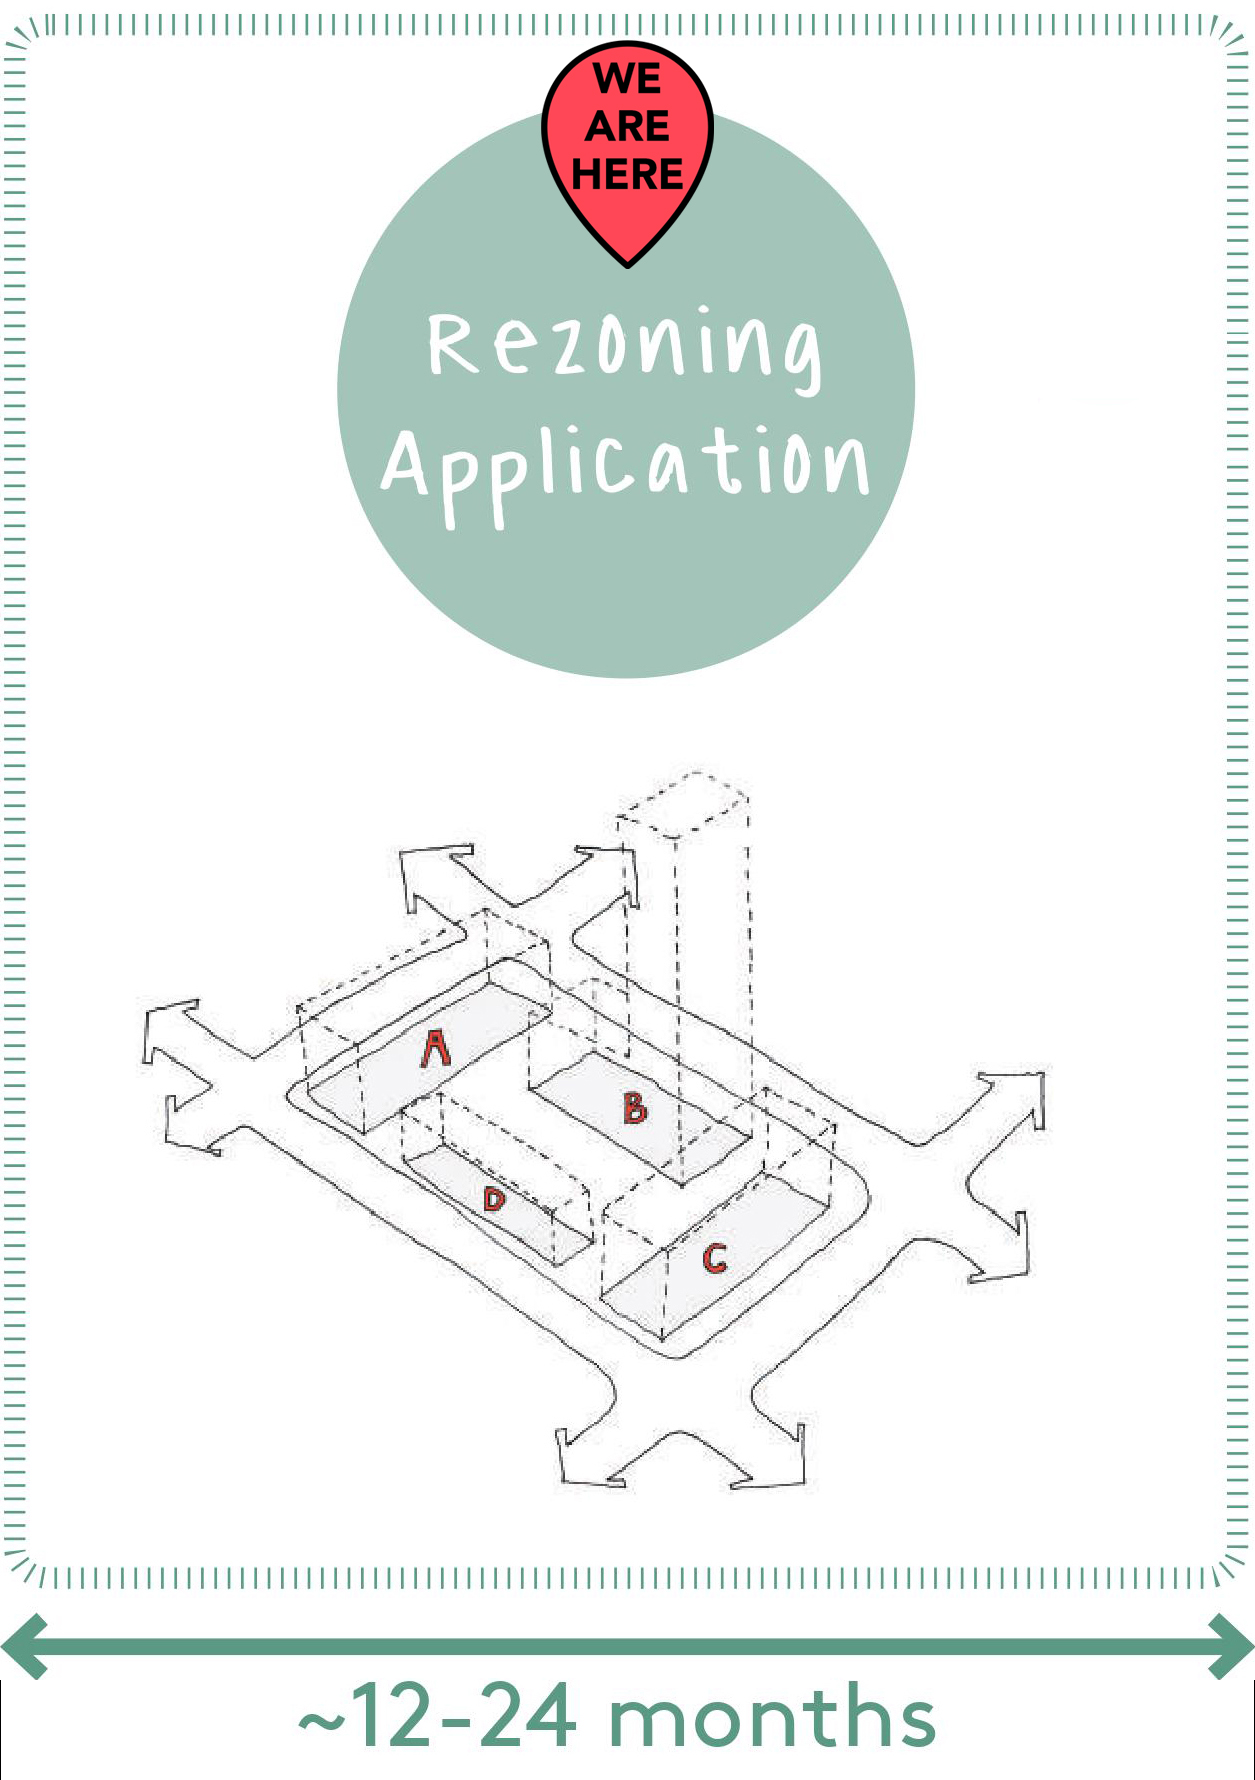 We are Here - Rezoning Application - approx. 12 - 14 months